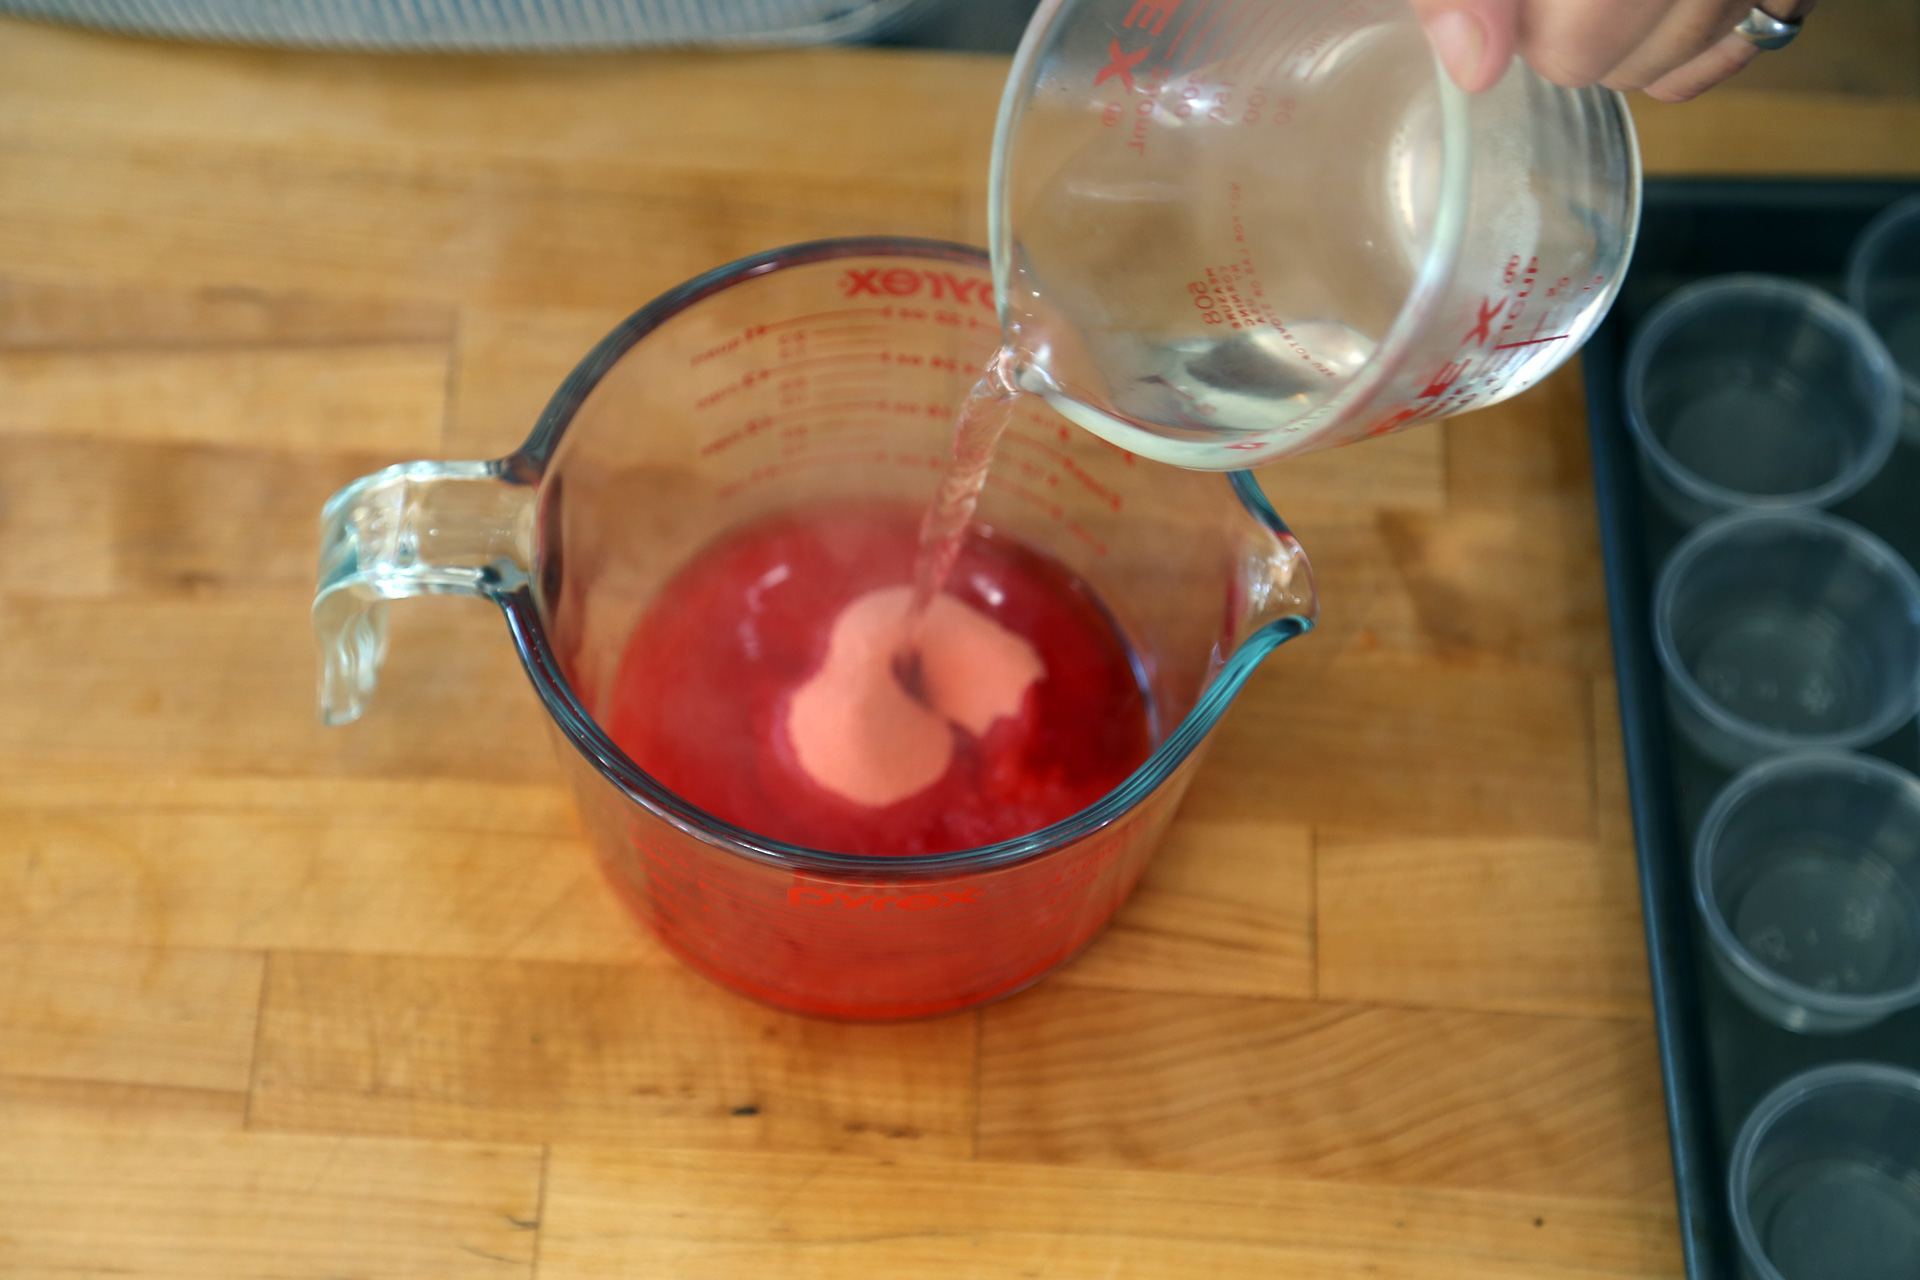 In a medium bowl add the gelatin and boiling water, stir to combine, then stir in the vodka mixture. 